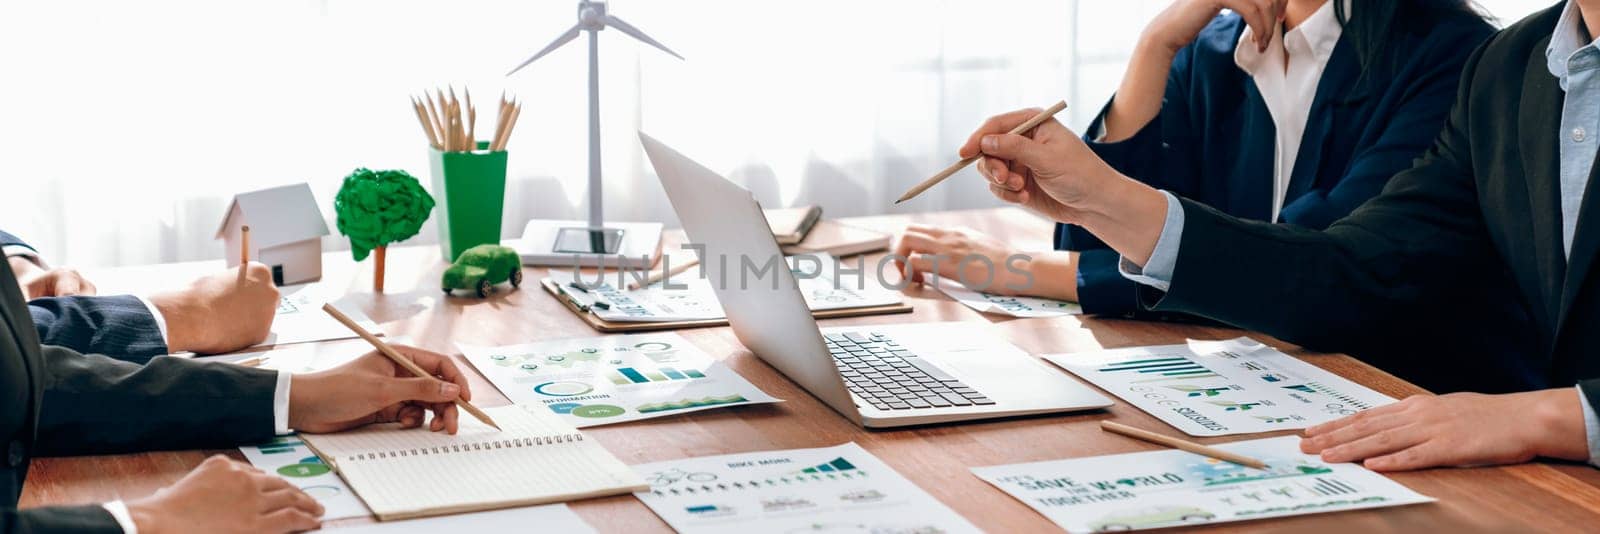 Eco business company meeting with group of business people using laptop to plan strategy and discuss marketing of eco-friendly and clean energy products. Green business company concept. Trailblazing